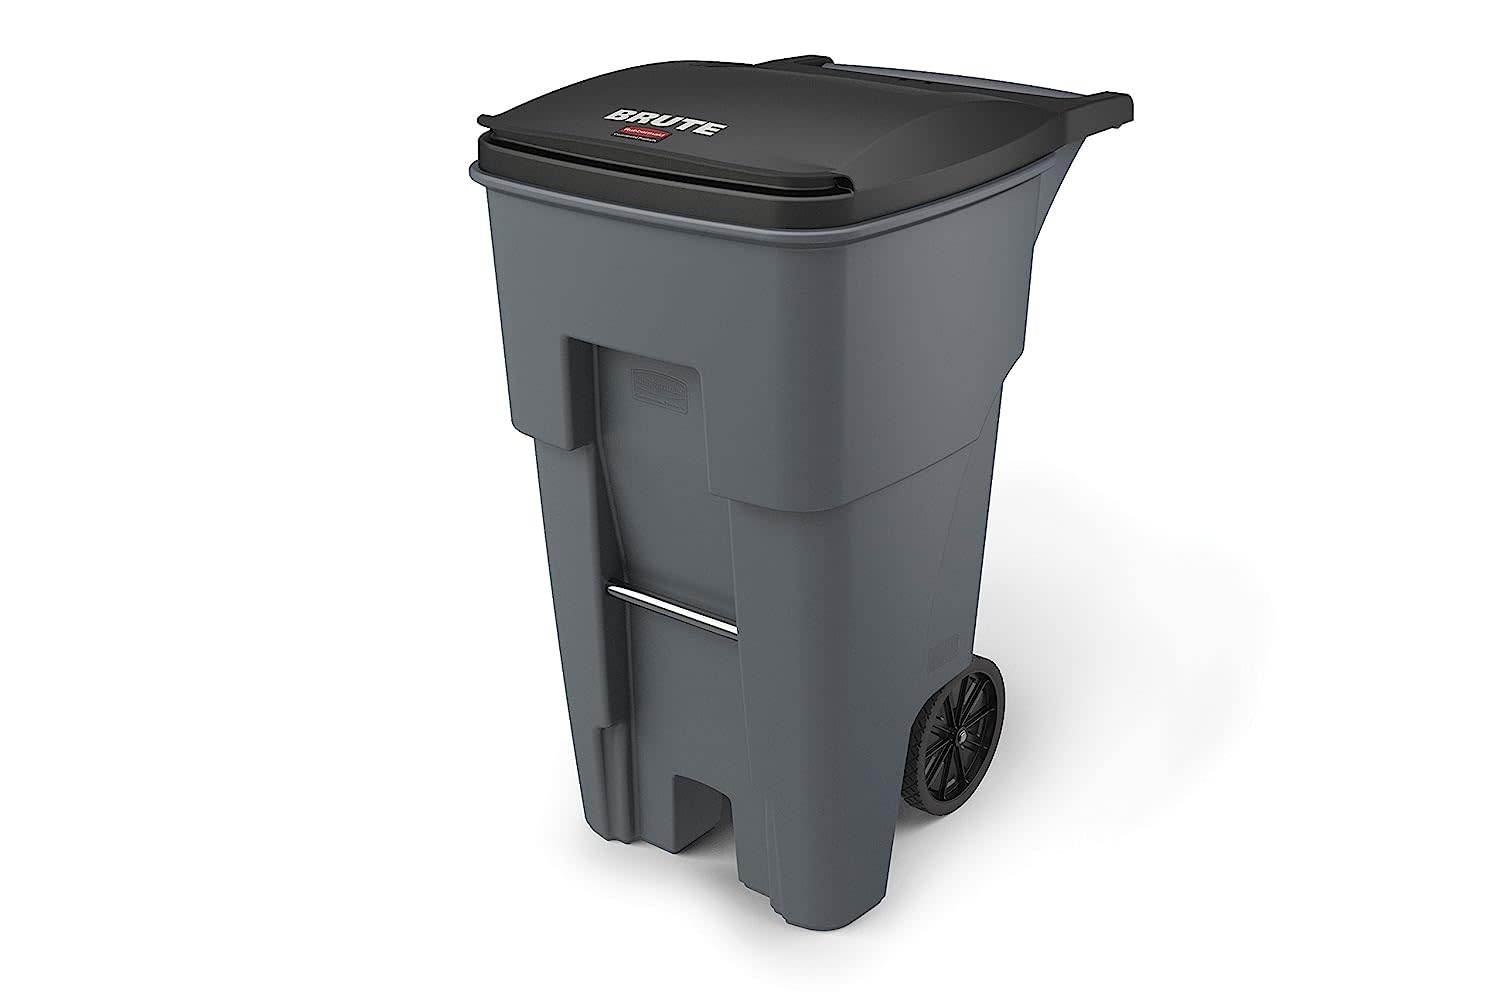 5 Alternative Uses for a Brute Trash Can by Rubbermaid